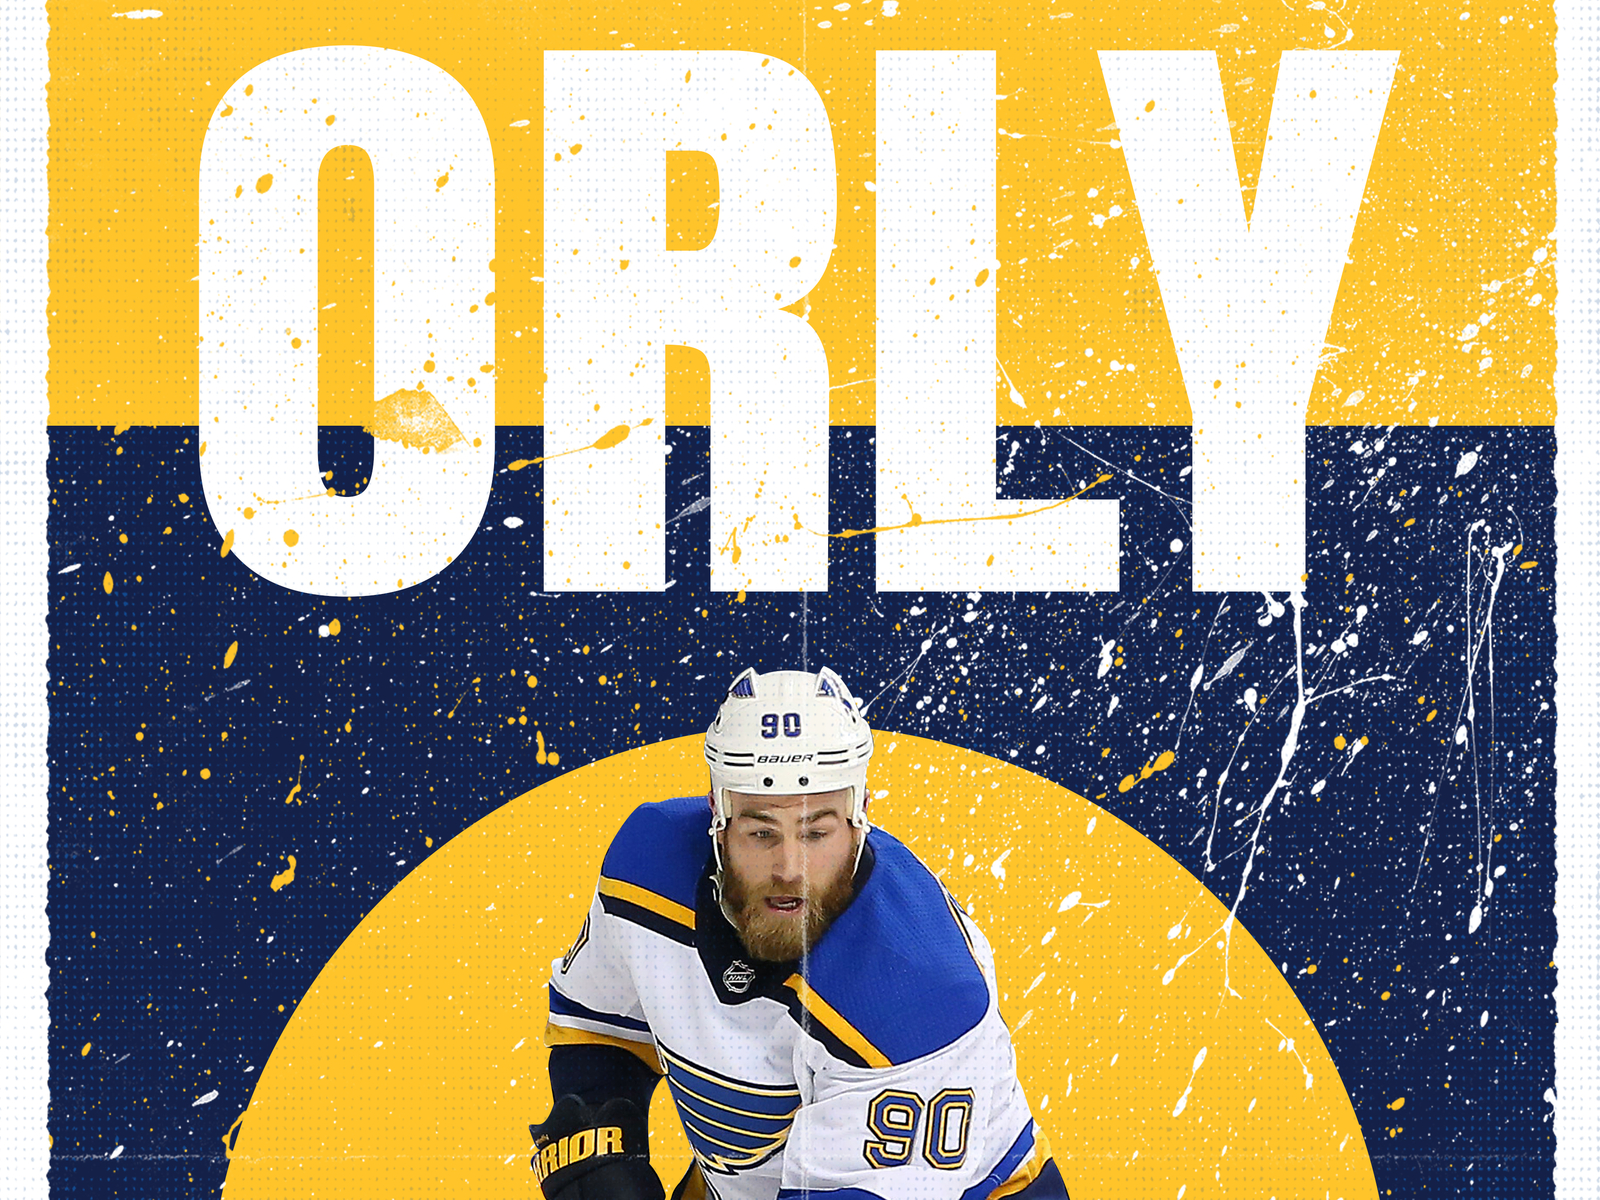 St. Louis Blues - Poster Designs by Roger McDonald on Dribbble